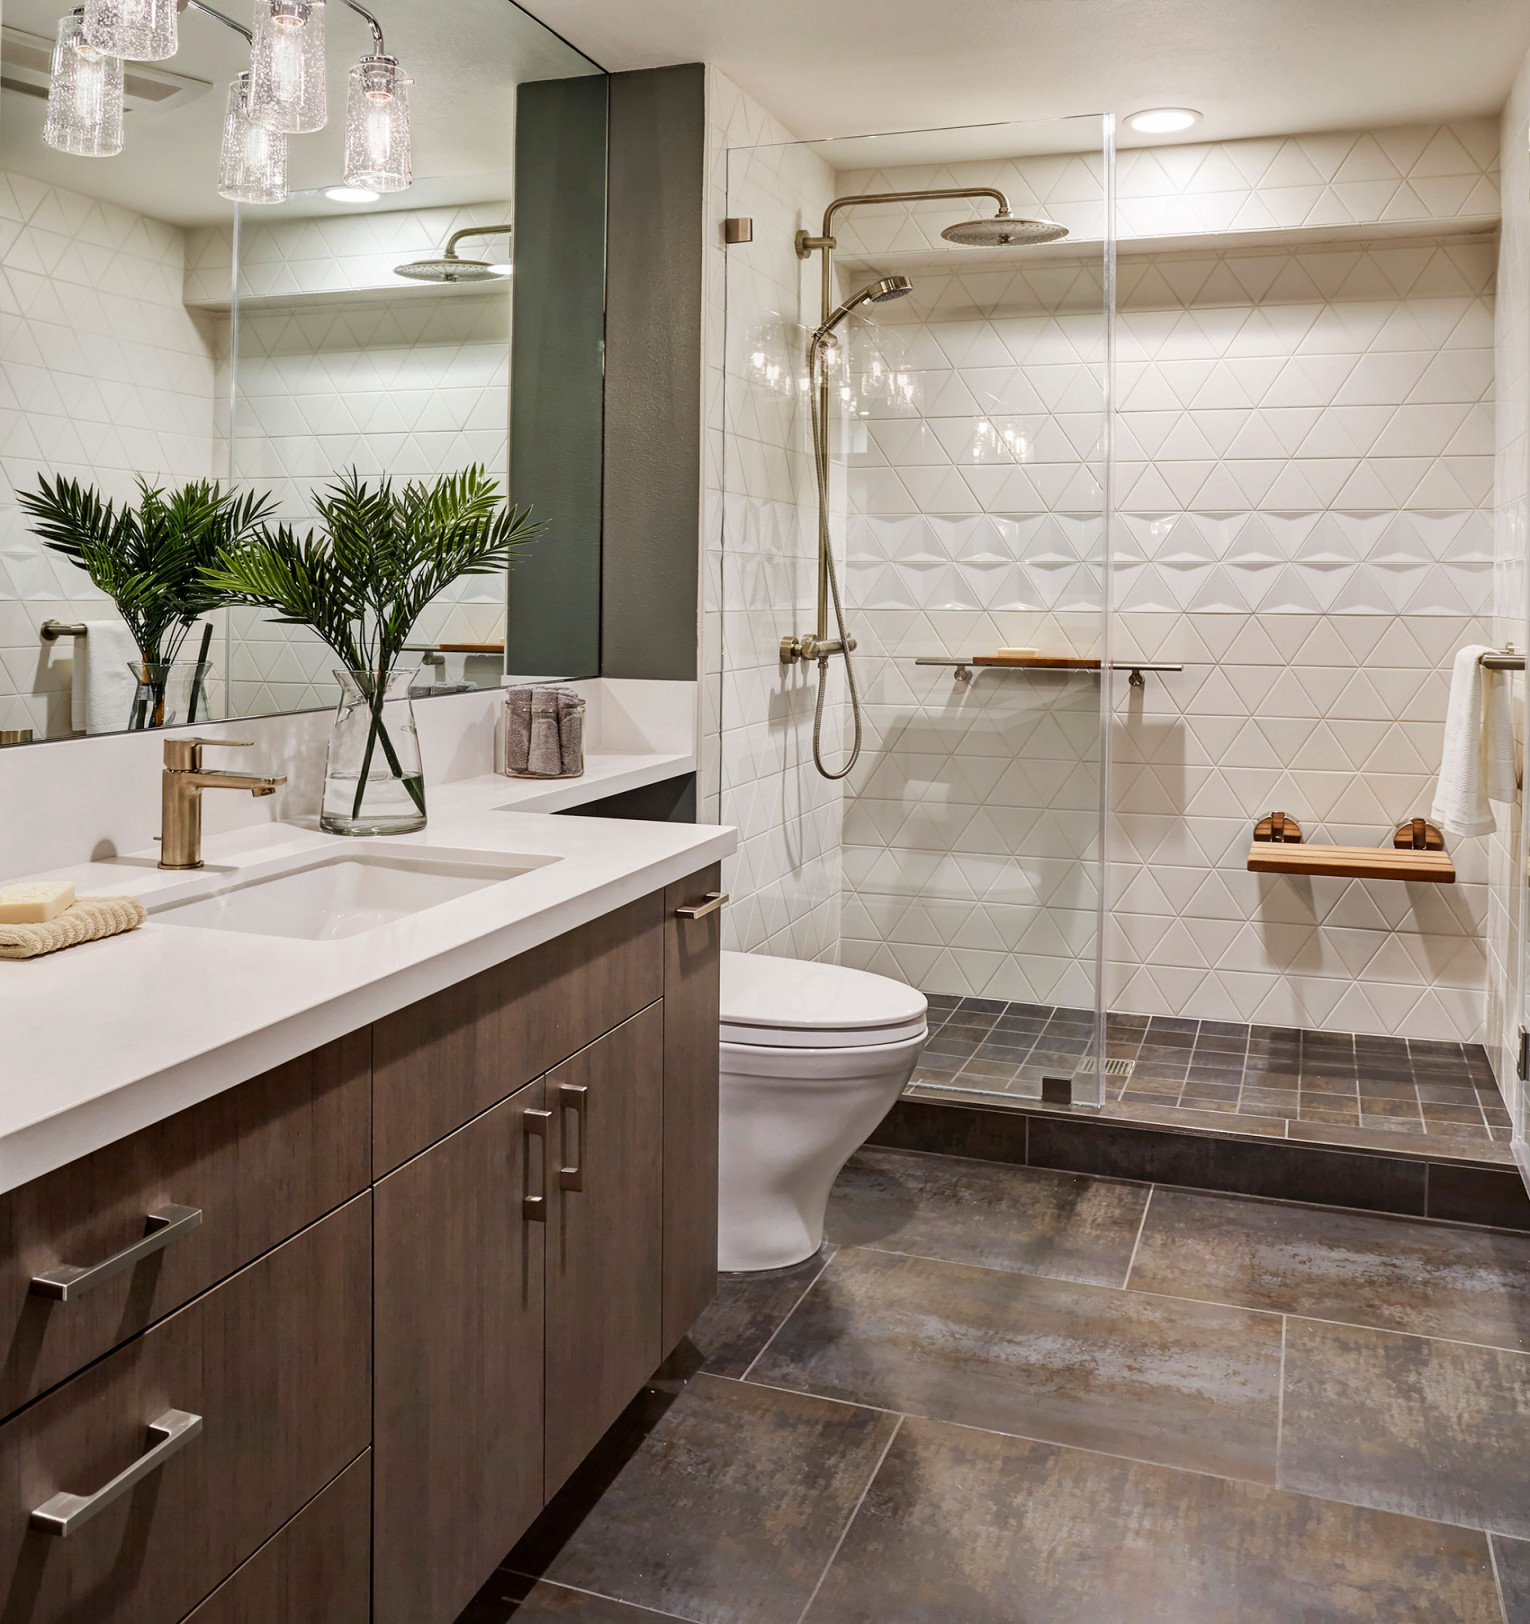 Upscale Bathroom Remodeling Trends for the East Bay Area